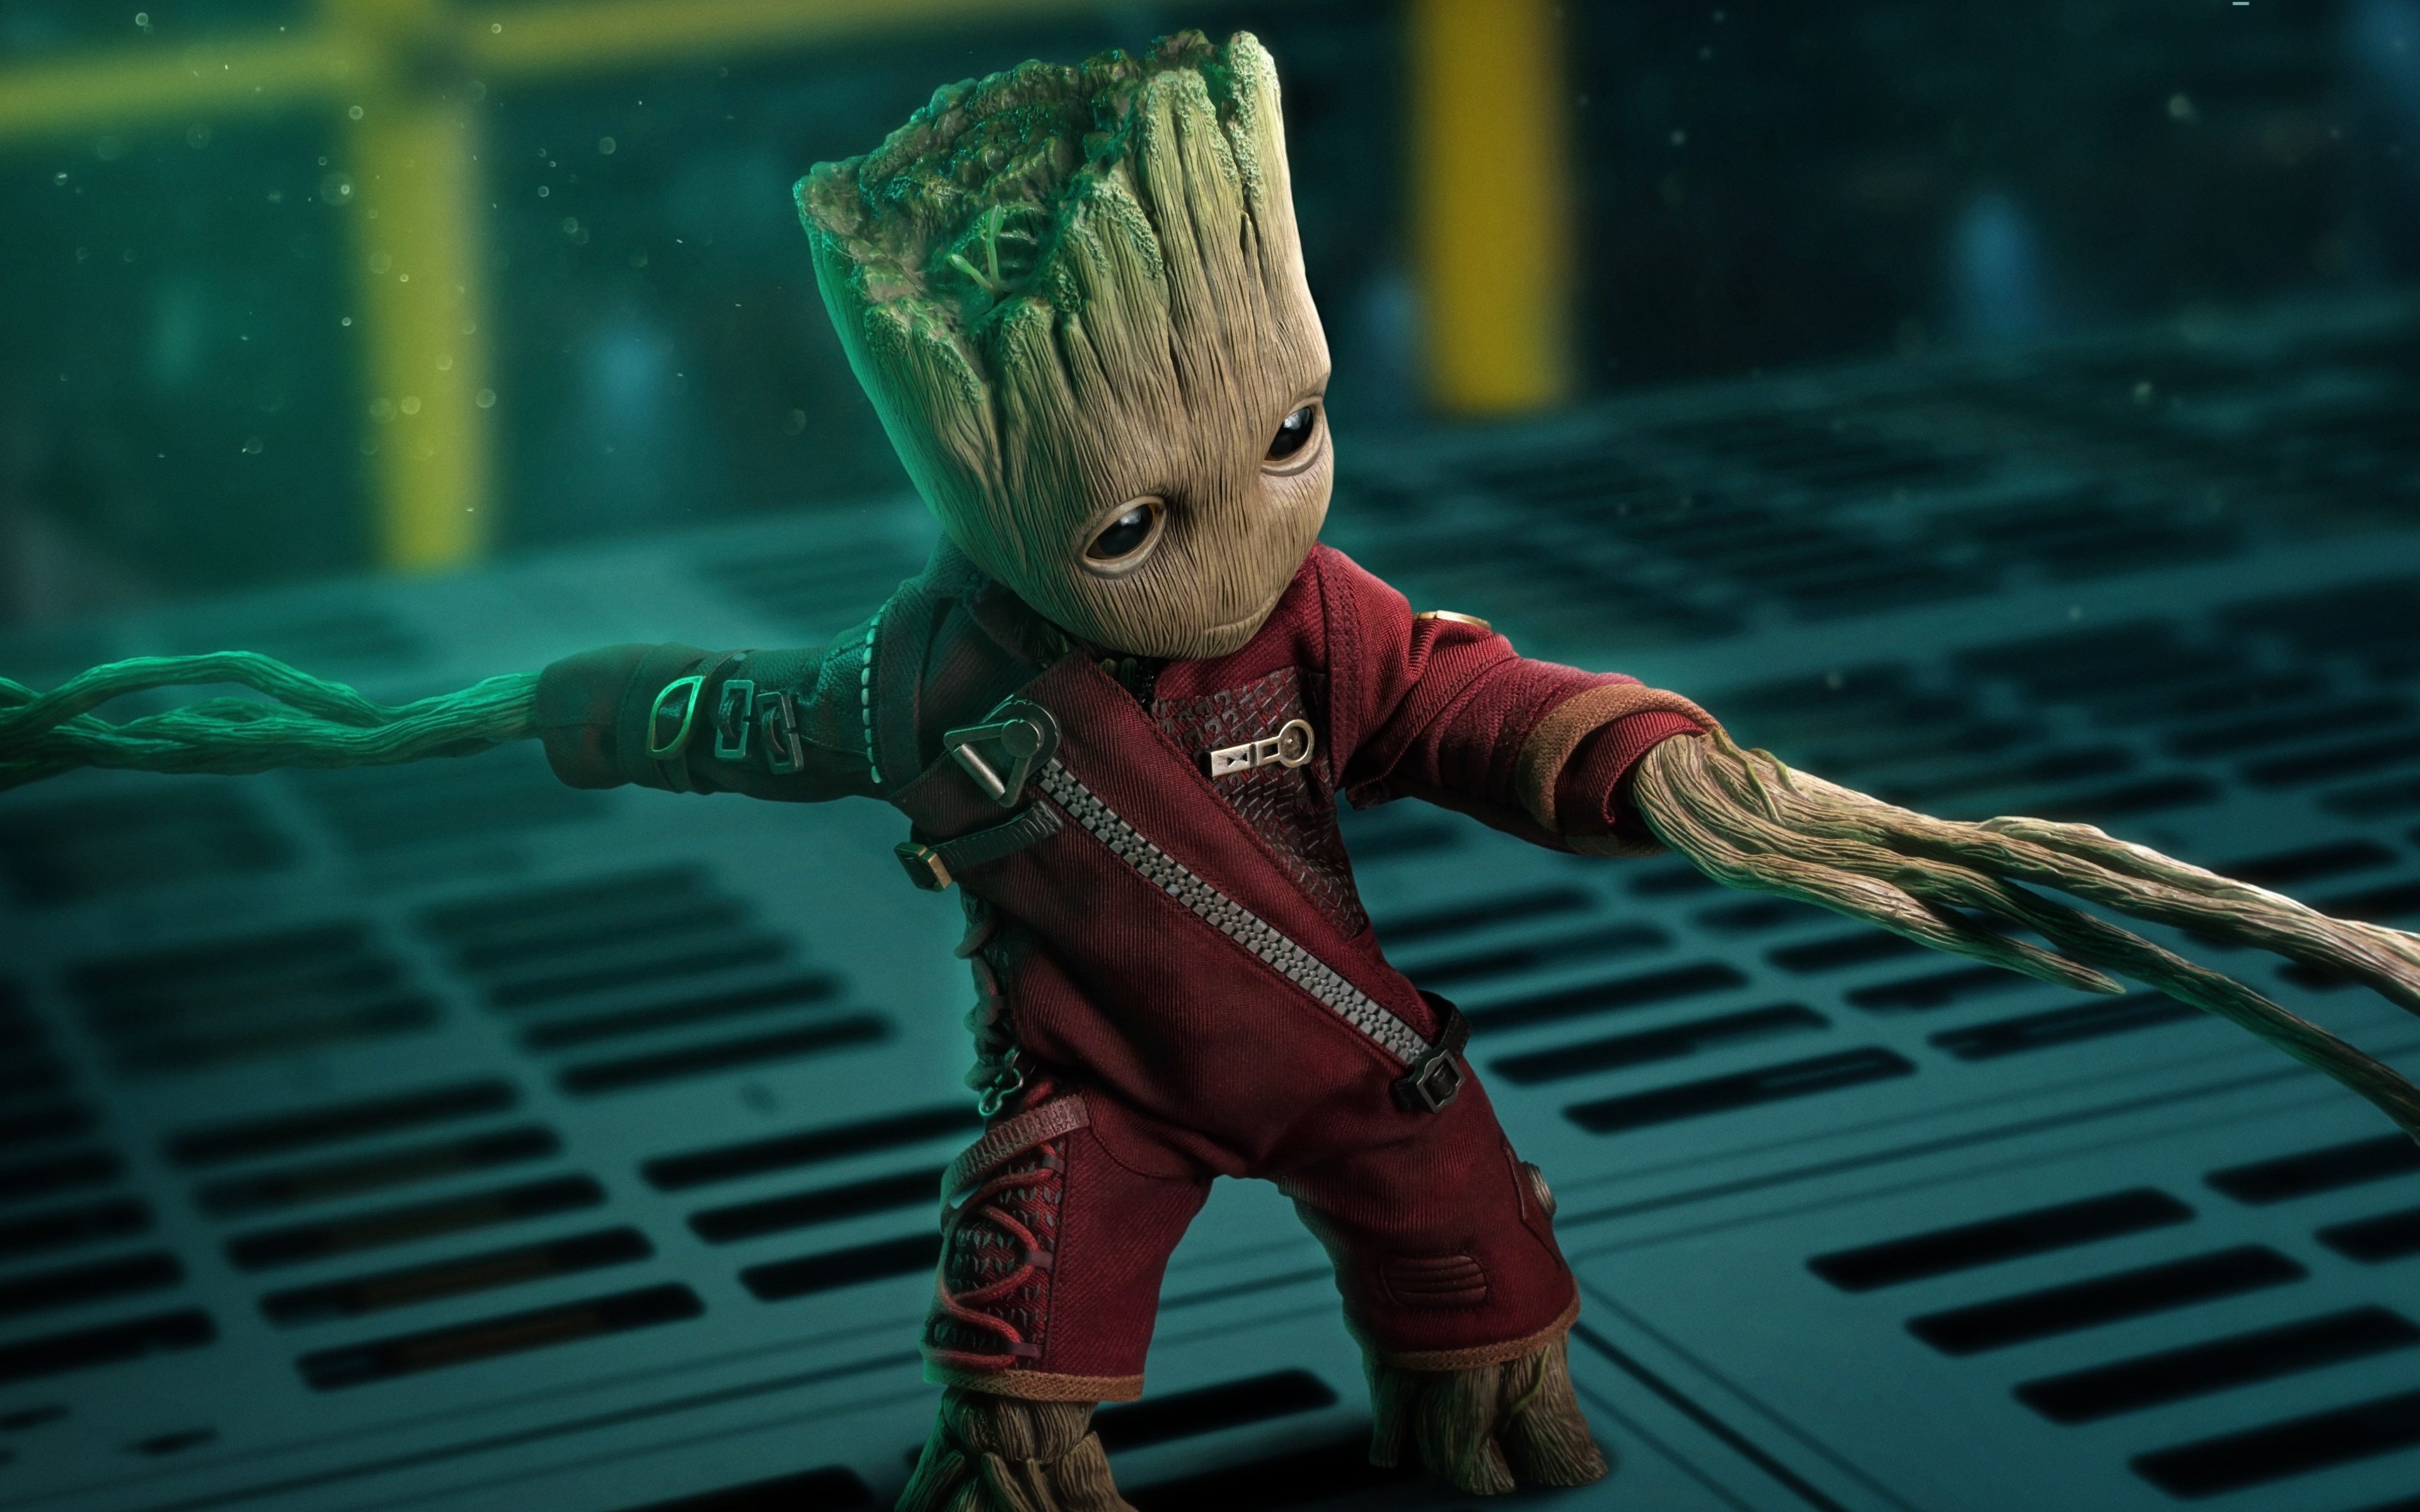 Downalod [3840x2400] Wallpaper - Guardians Of The Galaxy Baby Groot 4k , HD Wallpaper & Backgrounds